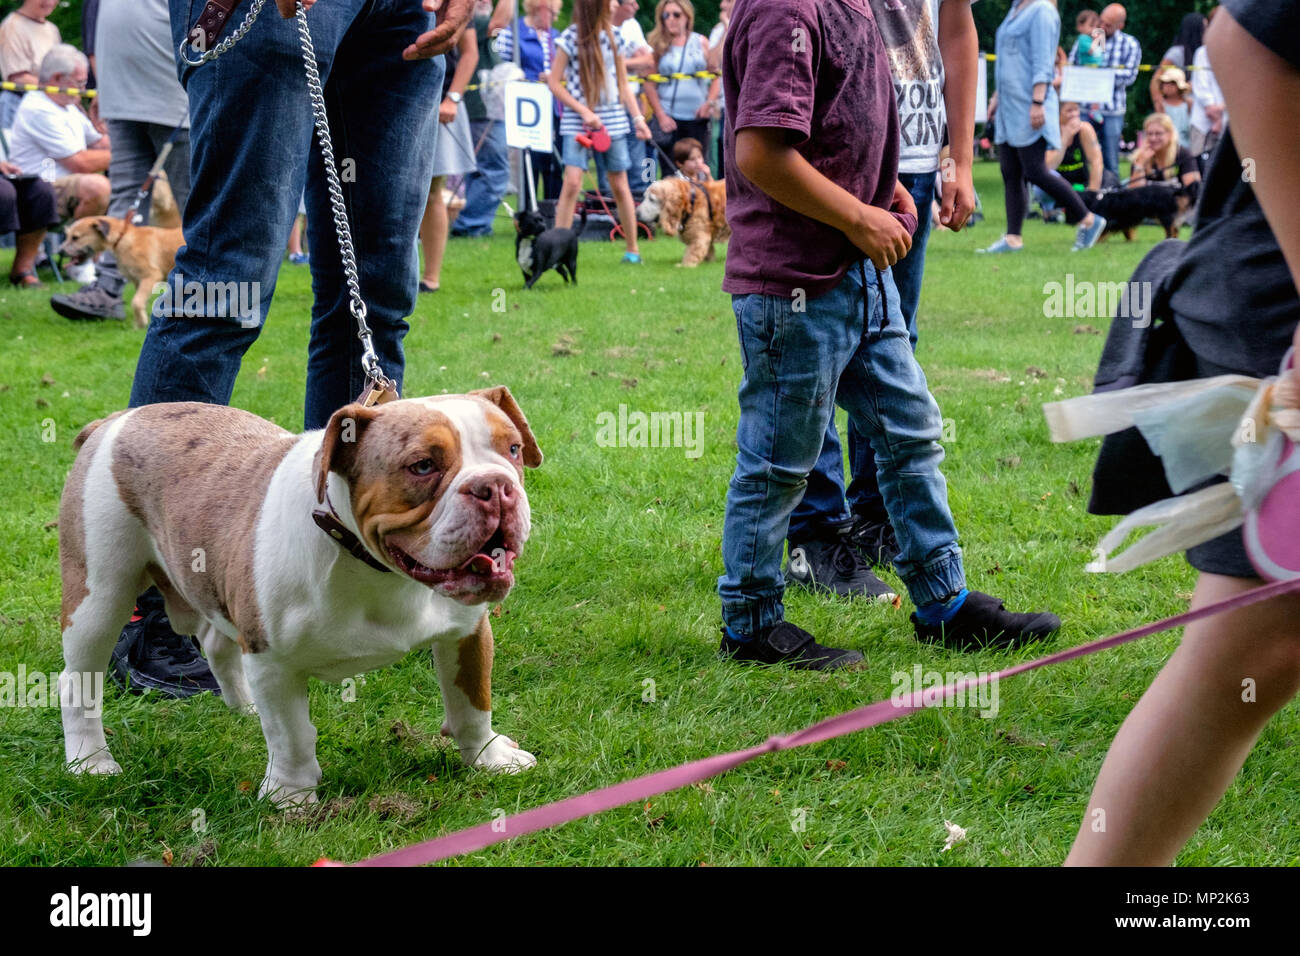 Bulldog on chain in Canons Park, Edgware, North London at dog show during annual Family Fun Day. Dogs, people, grass in background. Landscape. Stock Photo